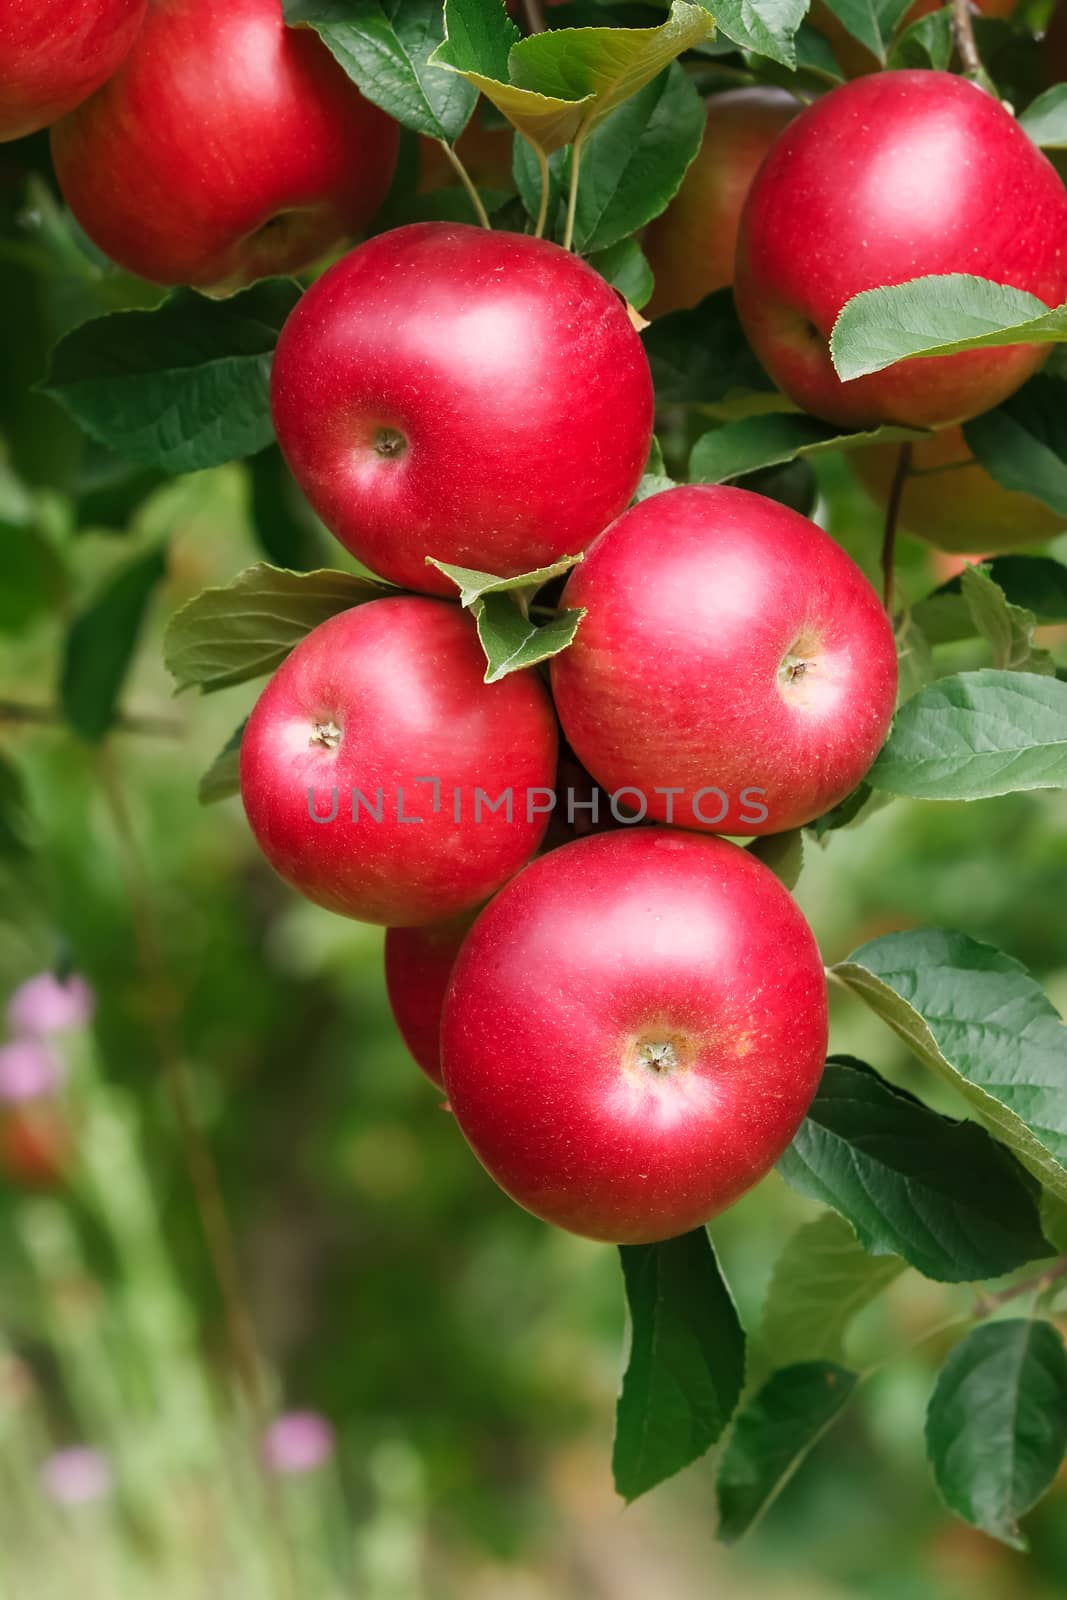 Bunch of red apples on a branch ready to be harvested. Selective focus